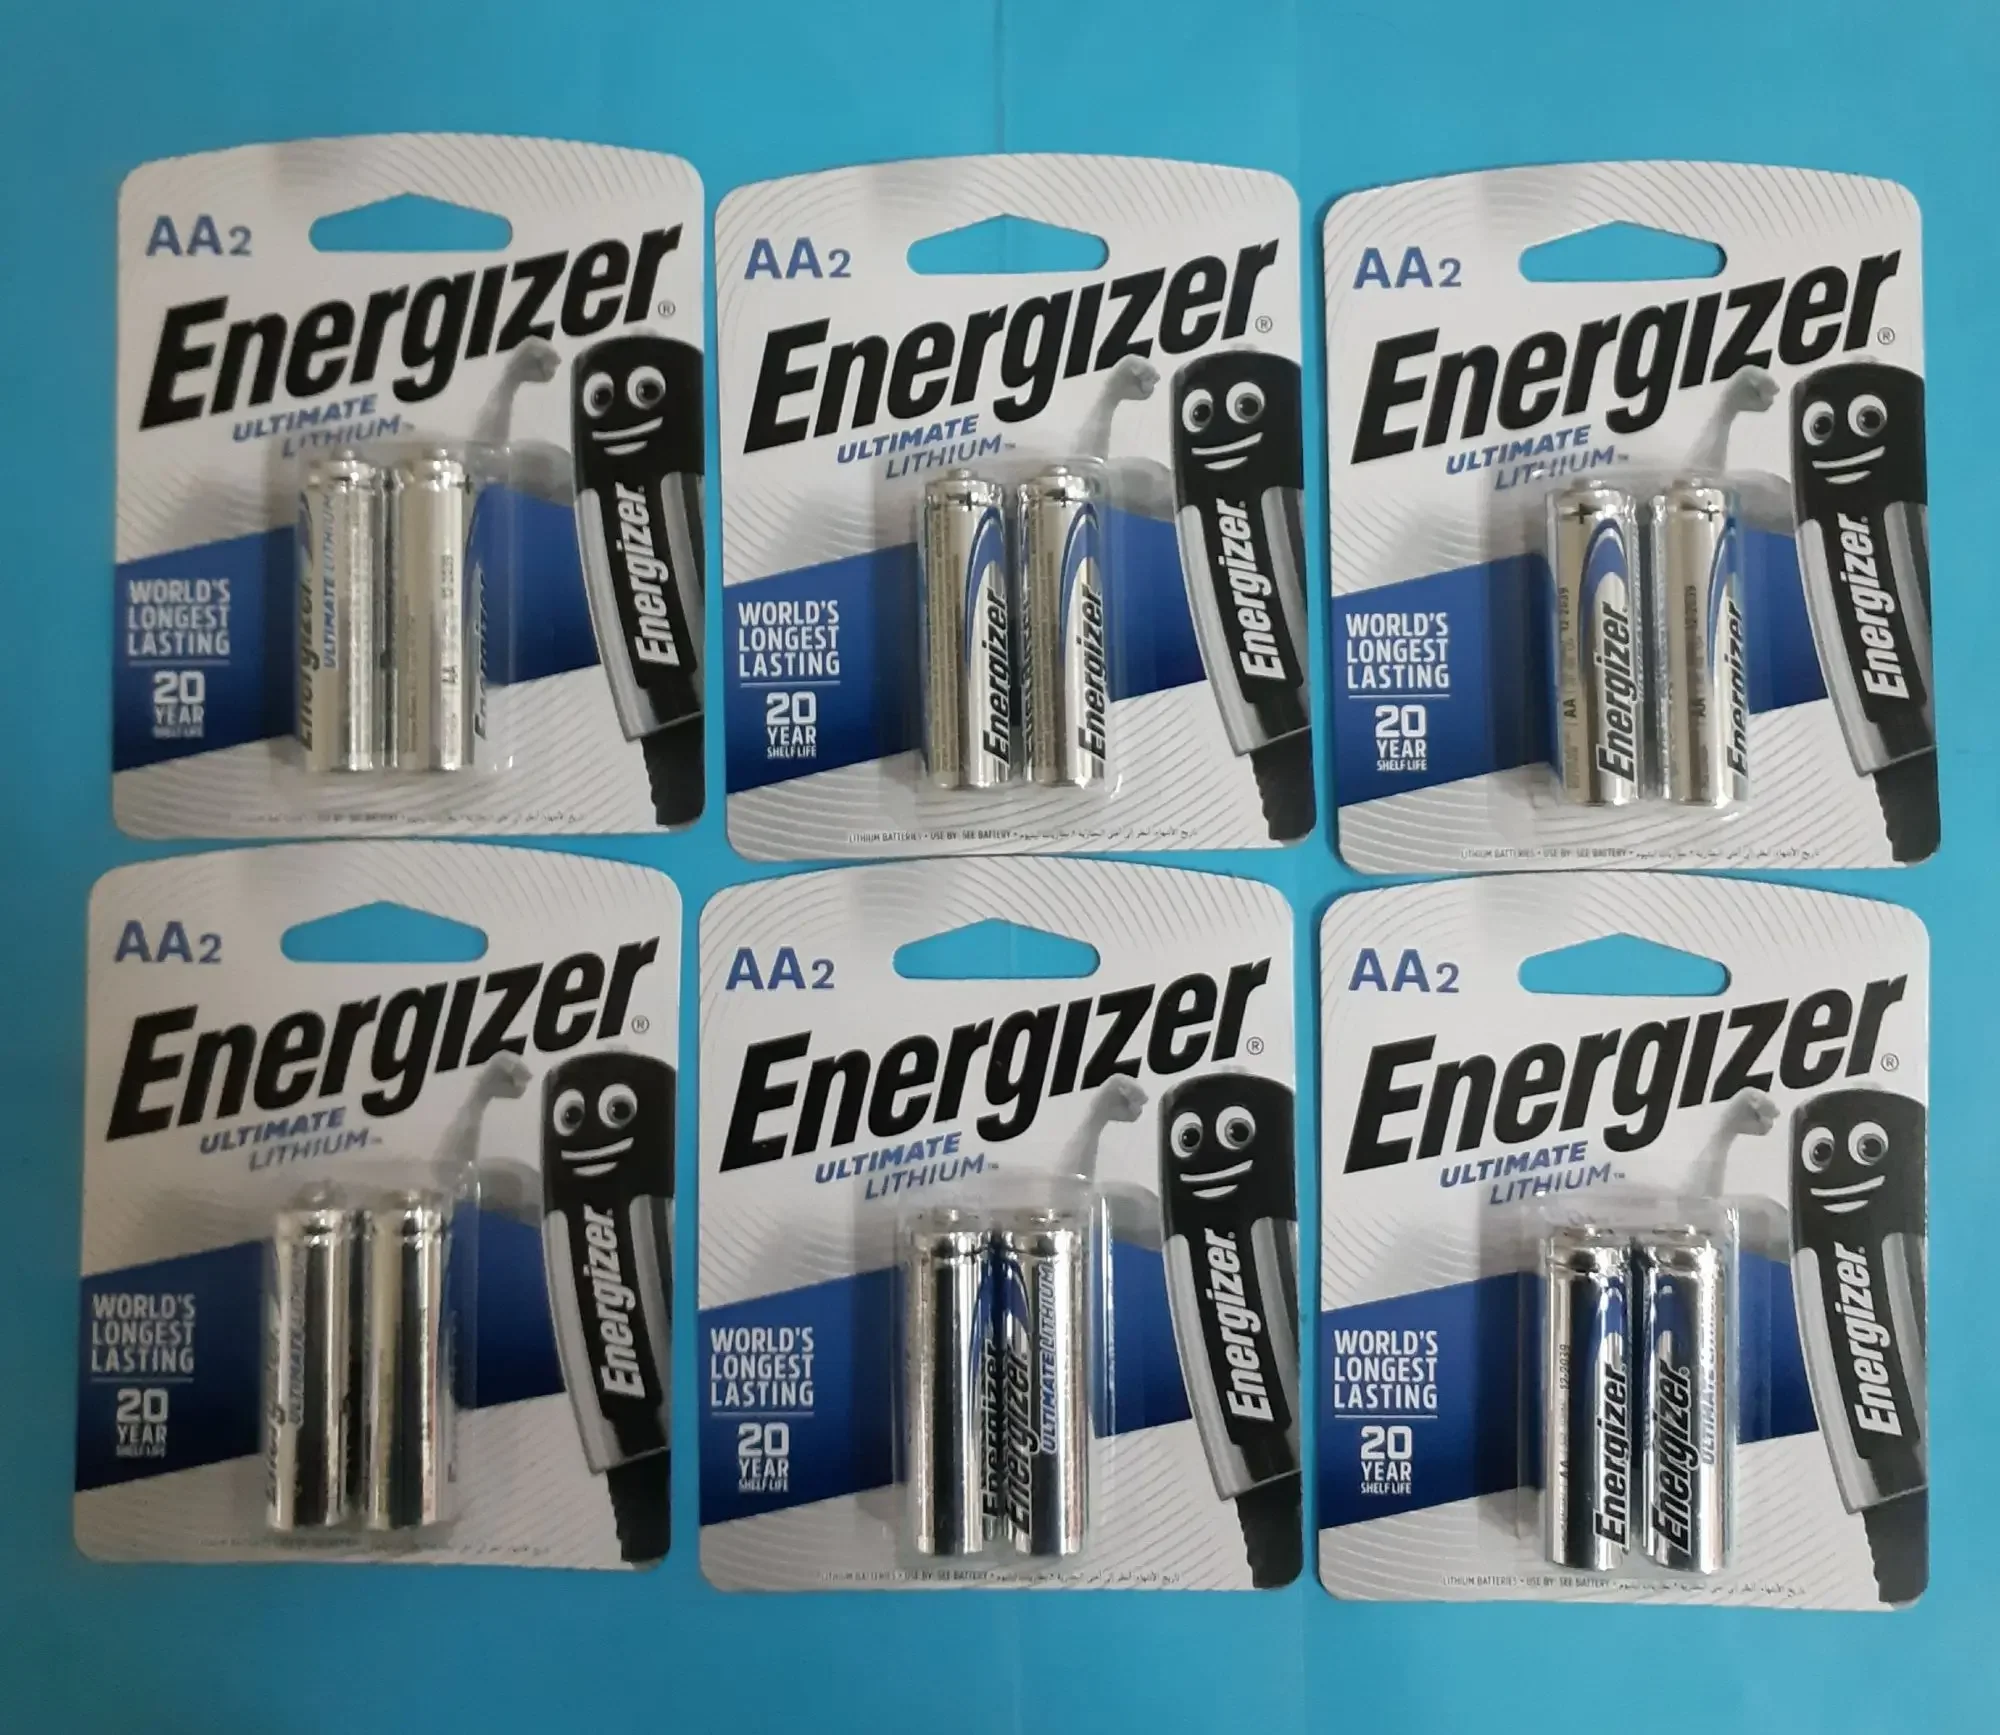 ( Box Deal) ENERGIZER ULTIMATE LITHIUM AA WITH 12 PIECES (6 CARD) 1.5V BATTERIES